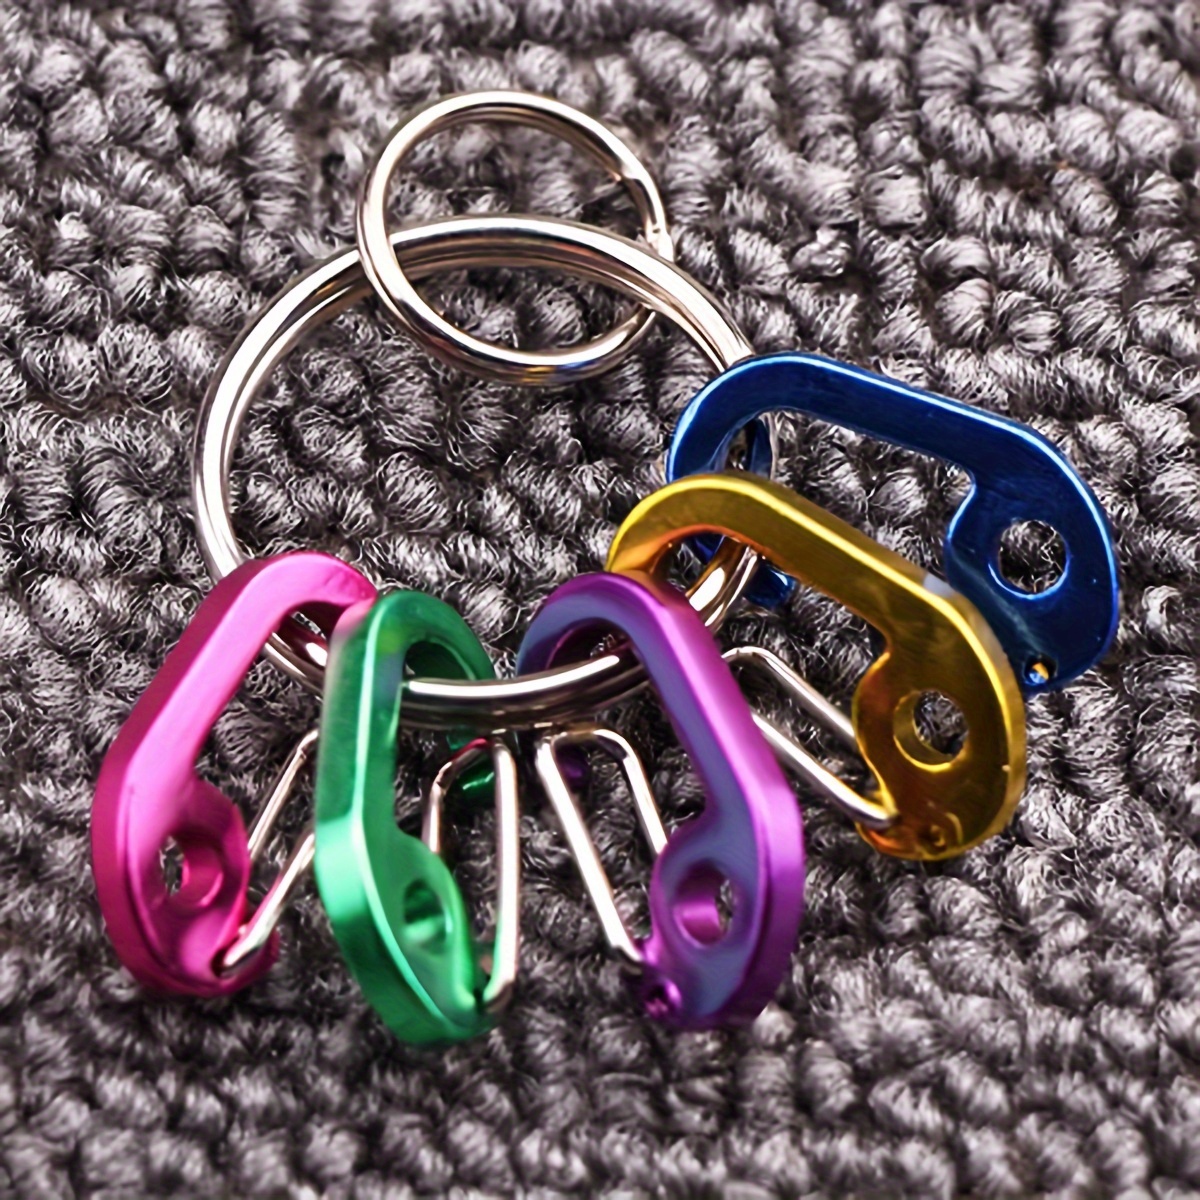 10pcs, Aluminum Alloy Carabiner Keychain Keyring, D-ring Spring Snap Hook  Key Chain Buckle For Outdoor Camping Hiking